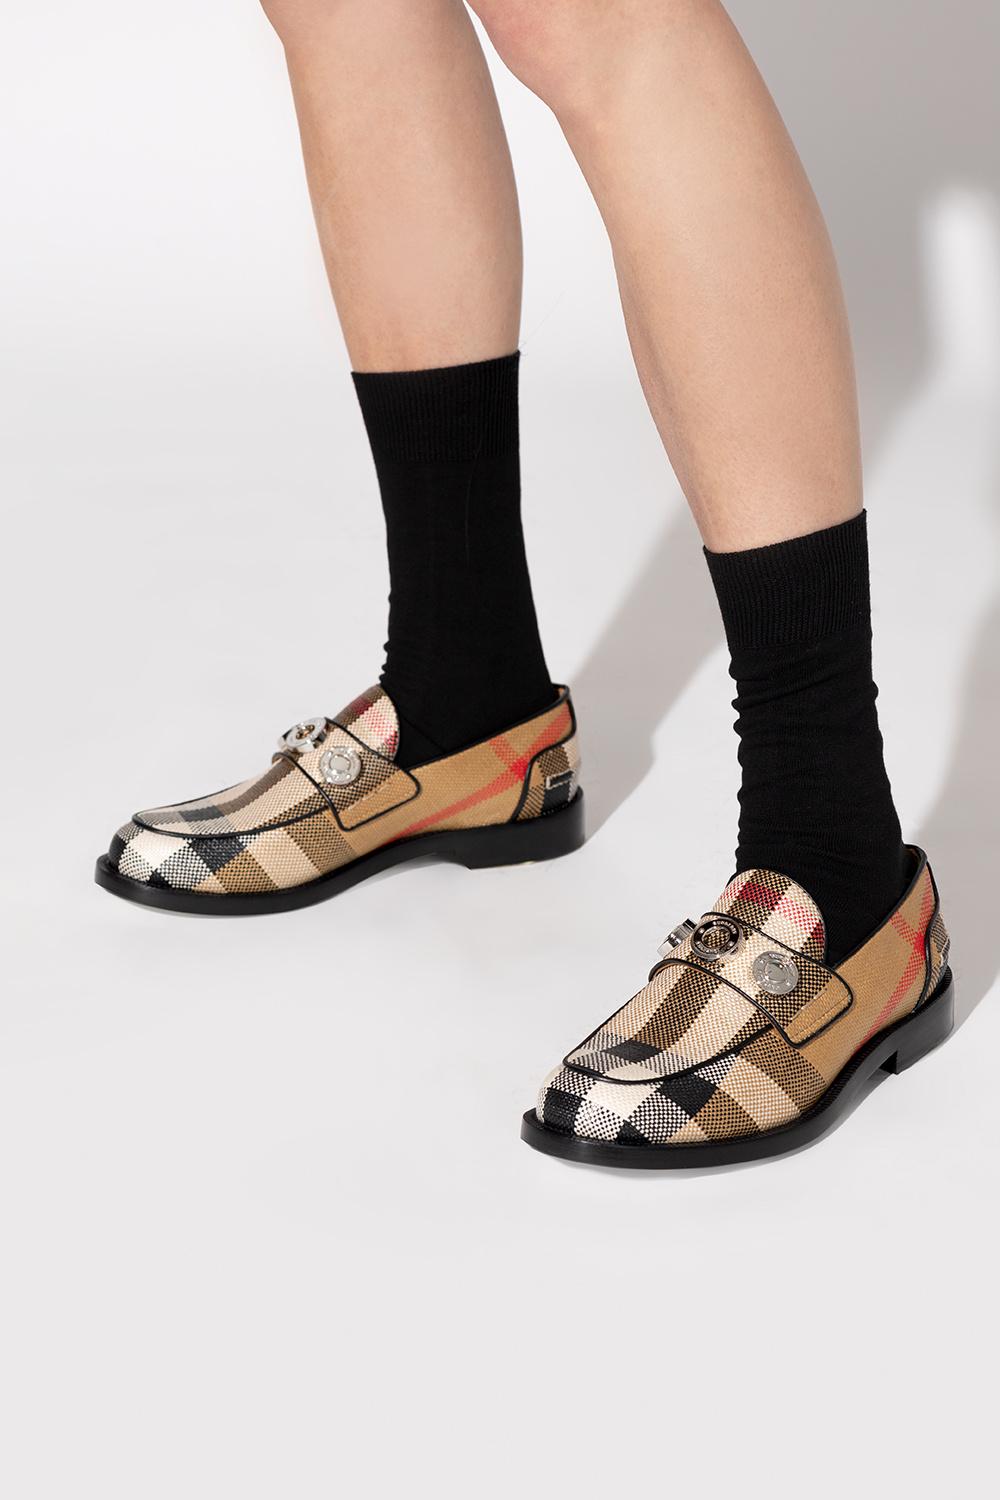 Refined and Classic: Burberry Broad Brook Loafer